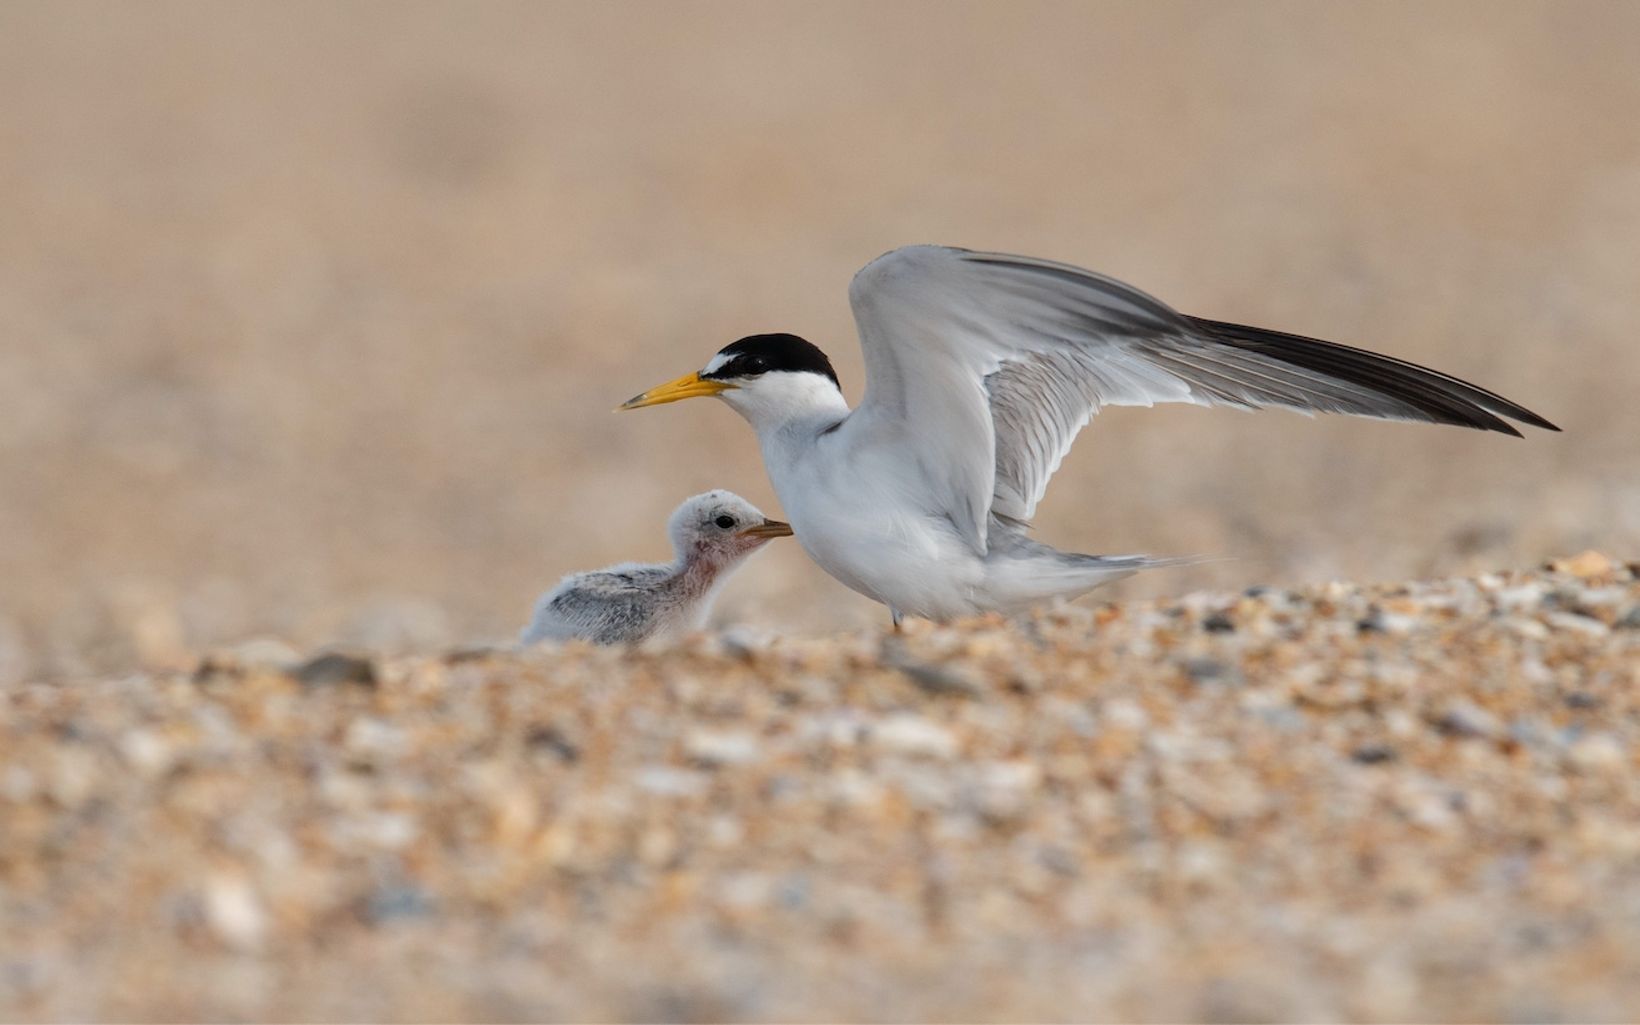 Least tern bird supervises a chick on the sand of the beach.